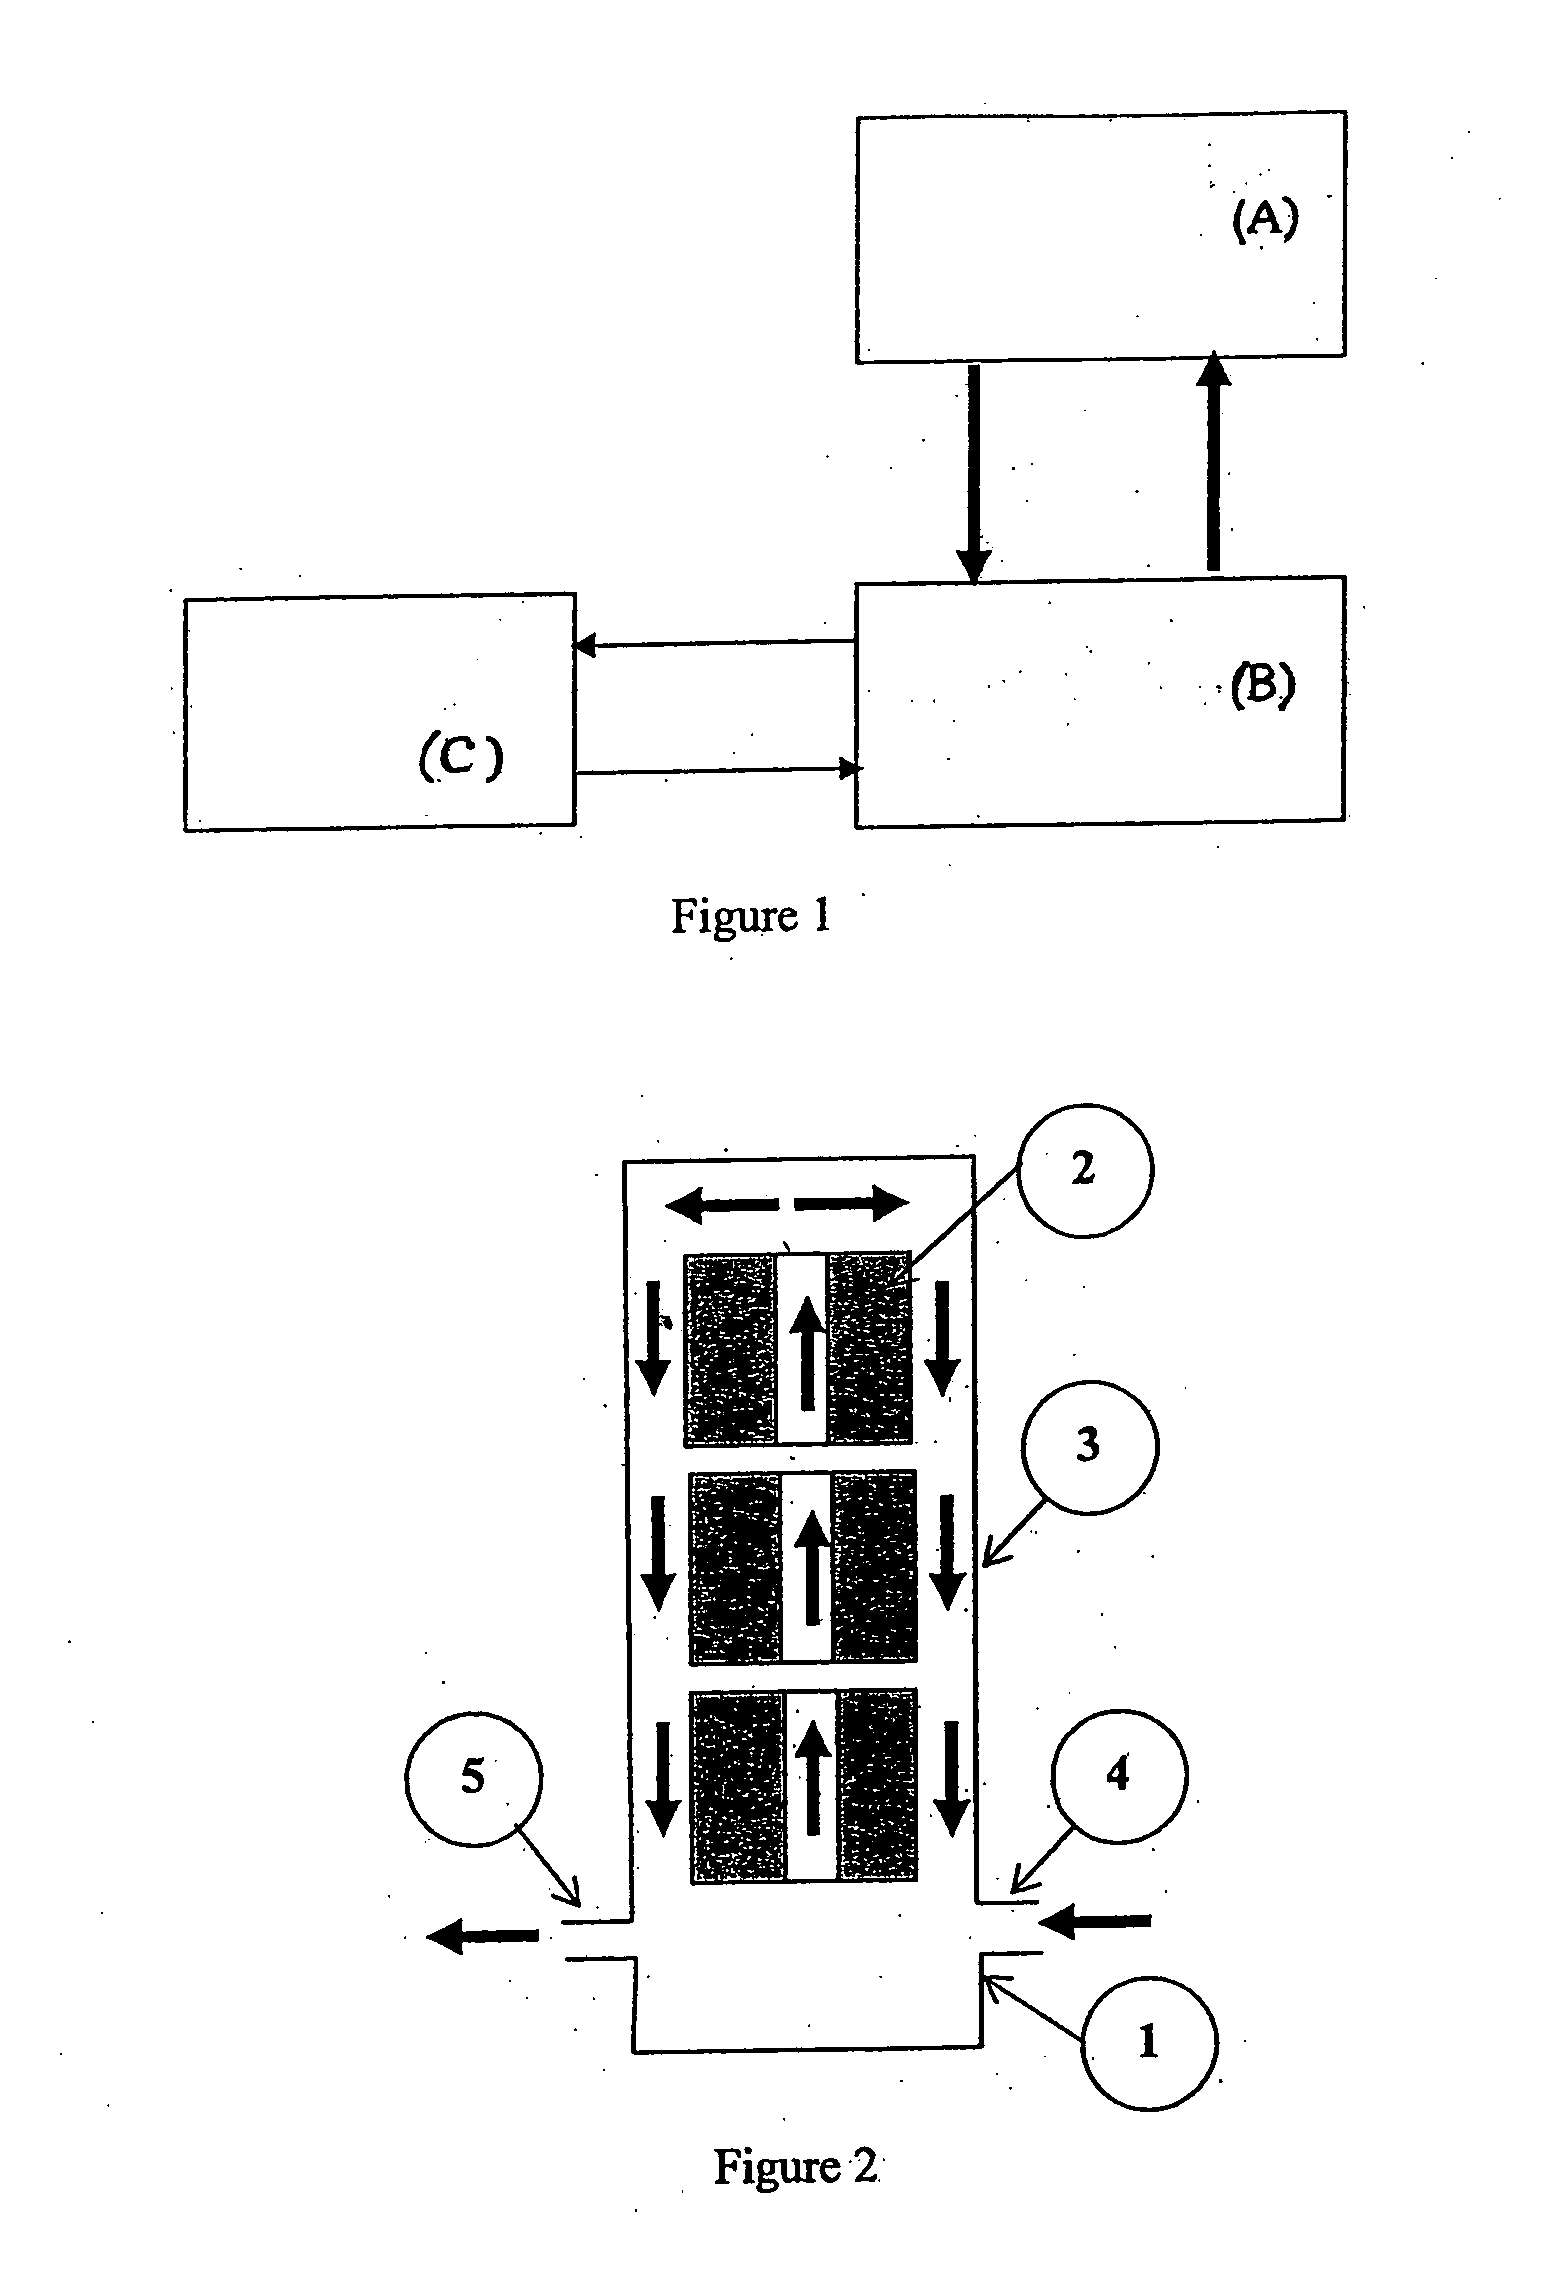 Method and Apparatus for Achieving Higher Cooling Rates of a Gas During Bypass Cooling in a Batch Annealing Furnace of Cold Rolling Mills